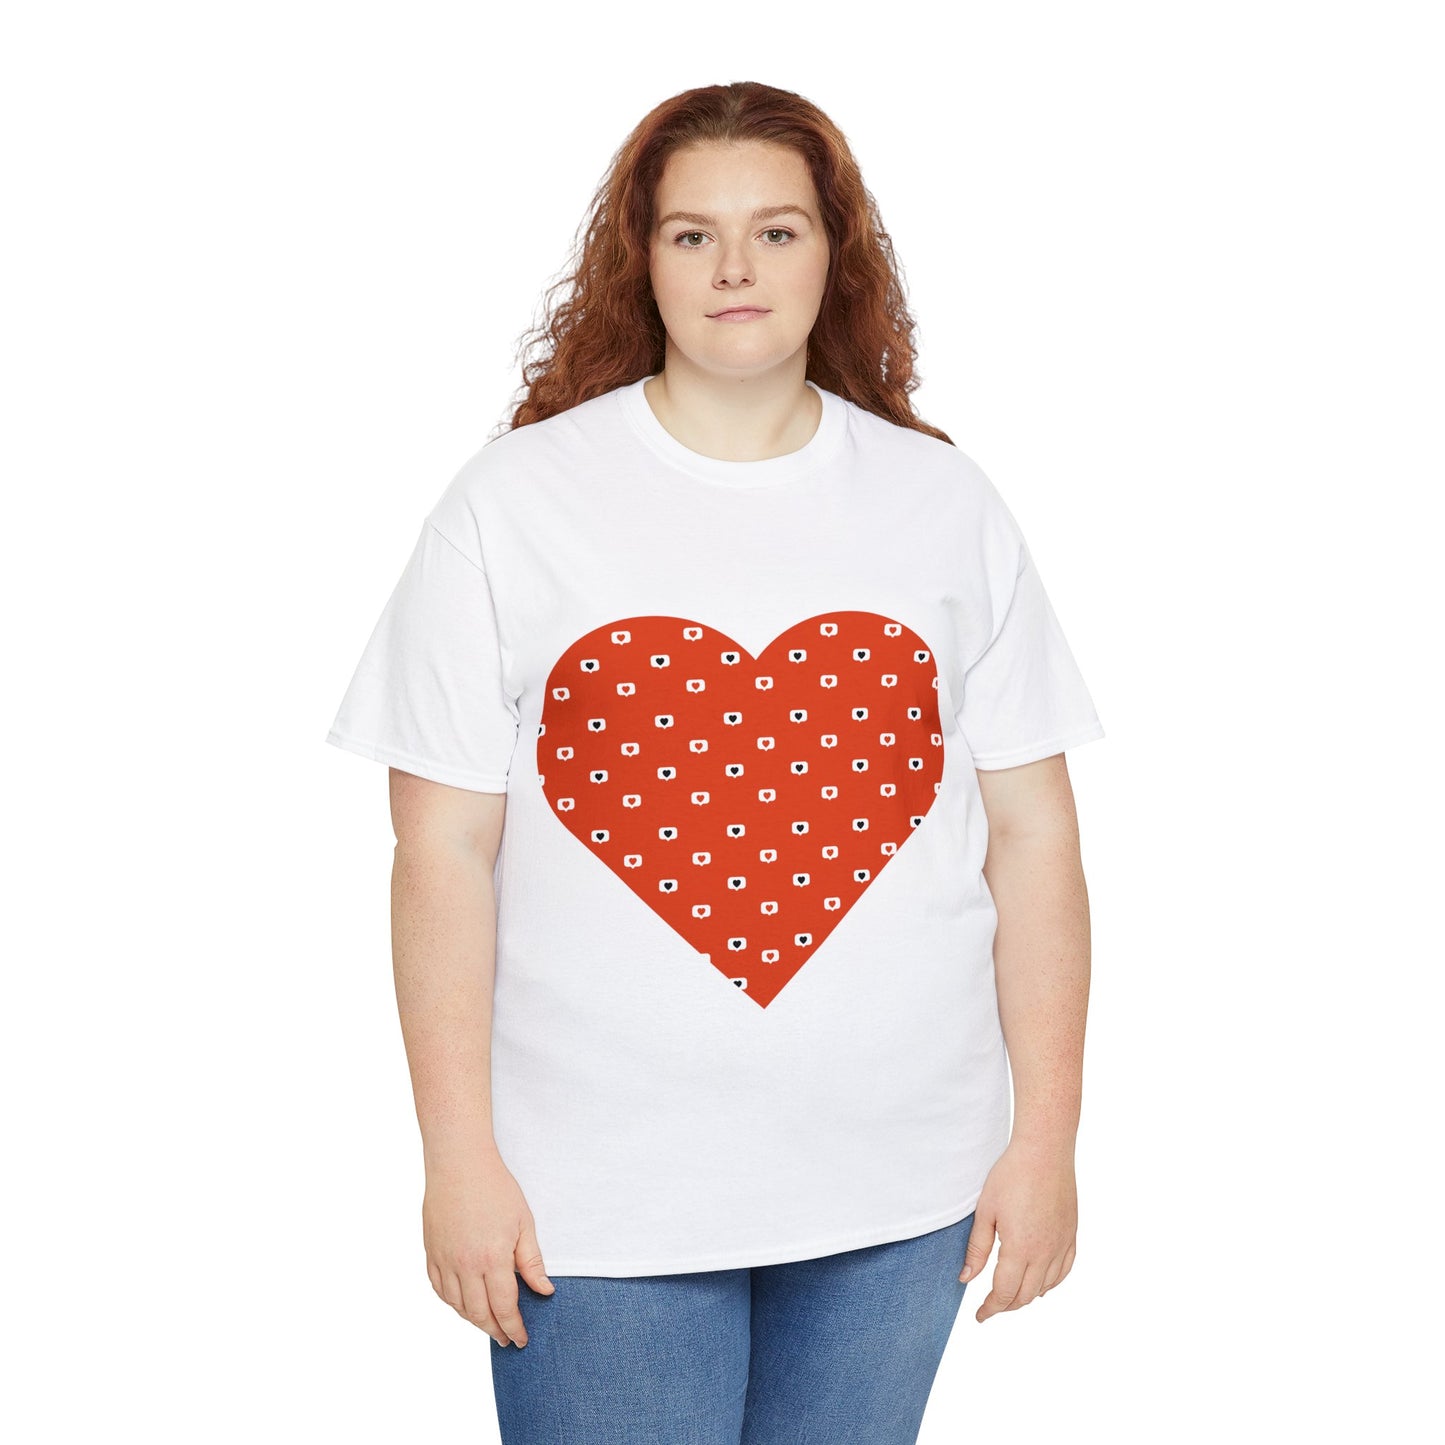 Heart Bubble T-shirt: Express Yourself with Style (matching leggings sold separately)